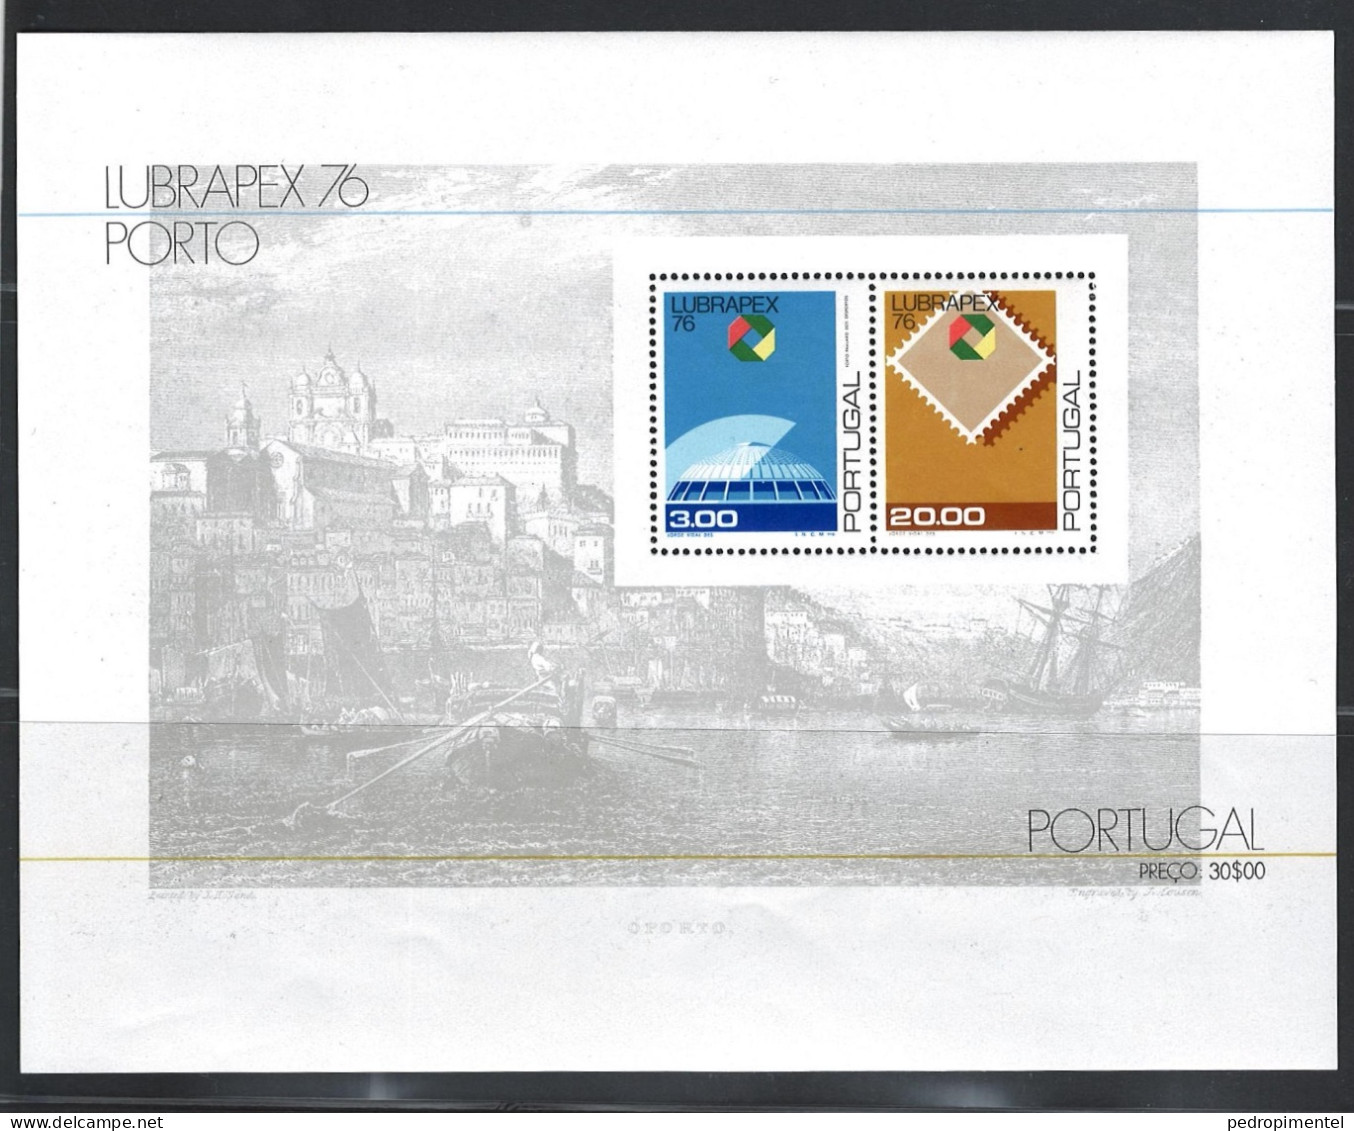 Portugal Madeira 1976 "Lubrapex 76" Condition MNH  Mundifil #1300-1301 (minisheet + Stamps) - Unused Stamps